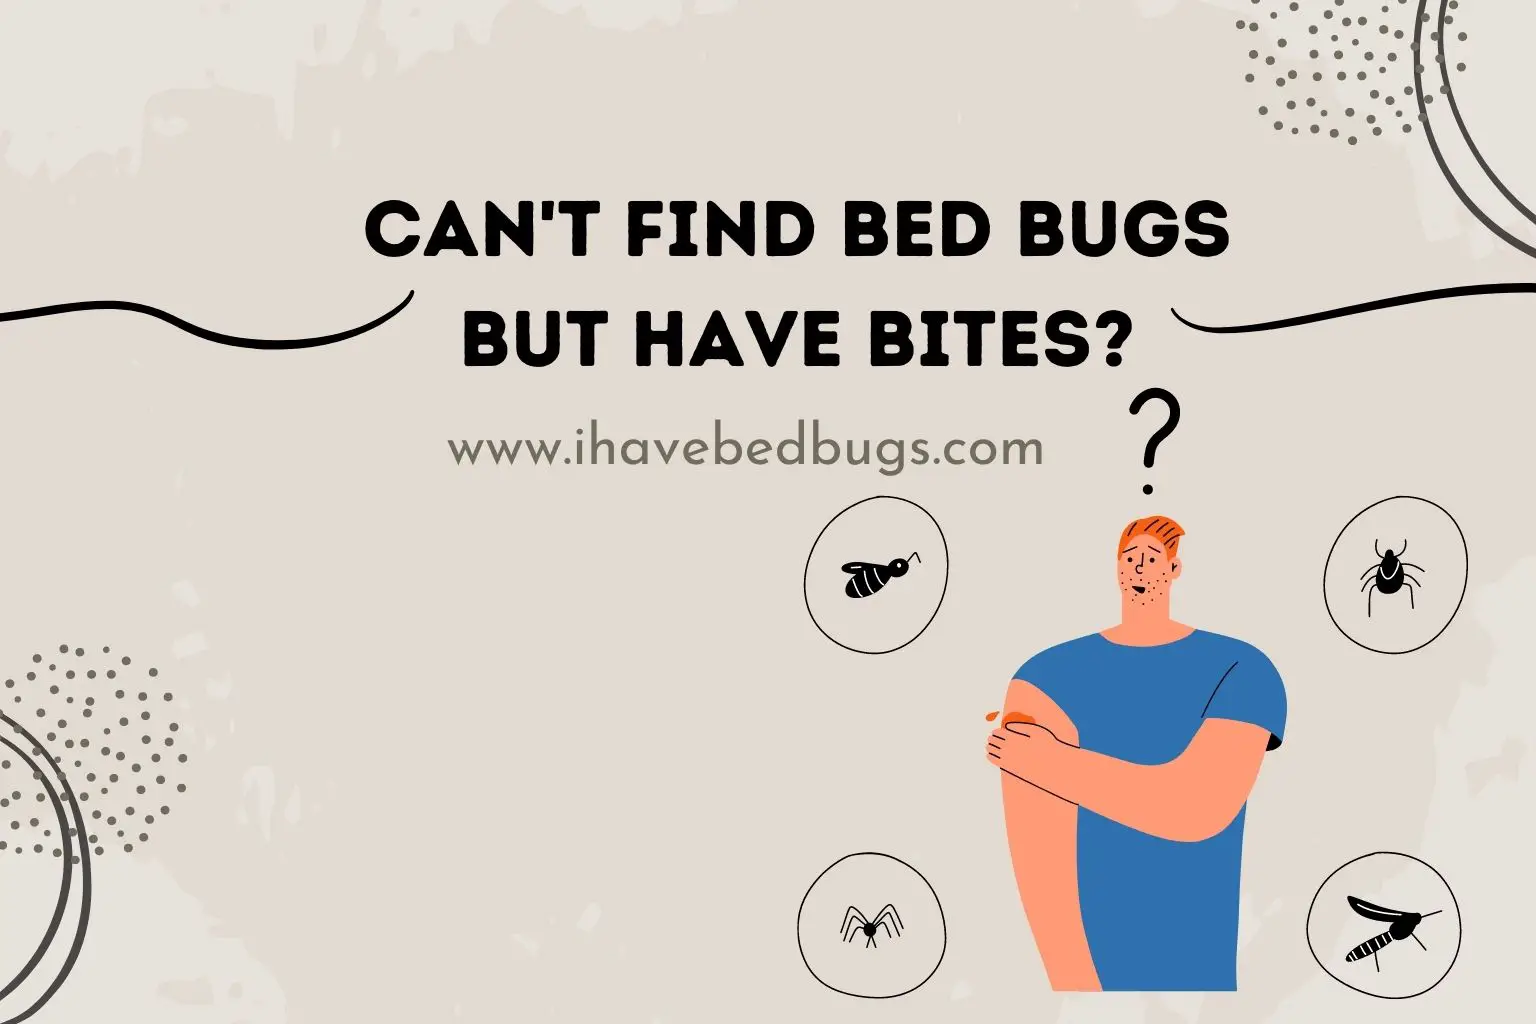 Can't find bed bugs but have bites